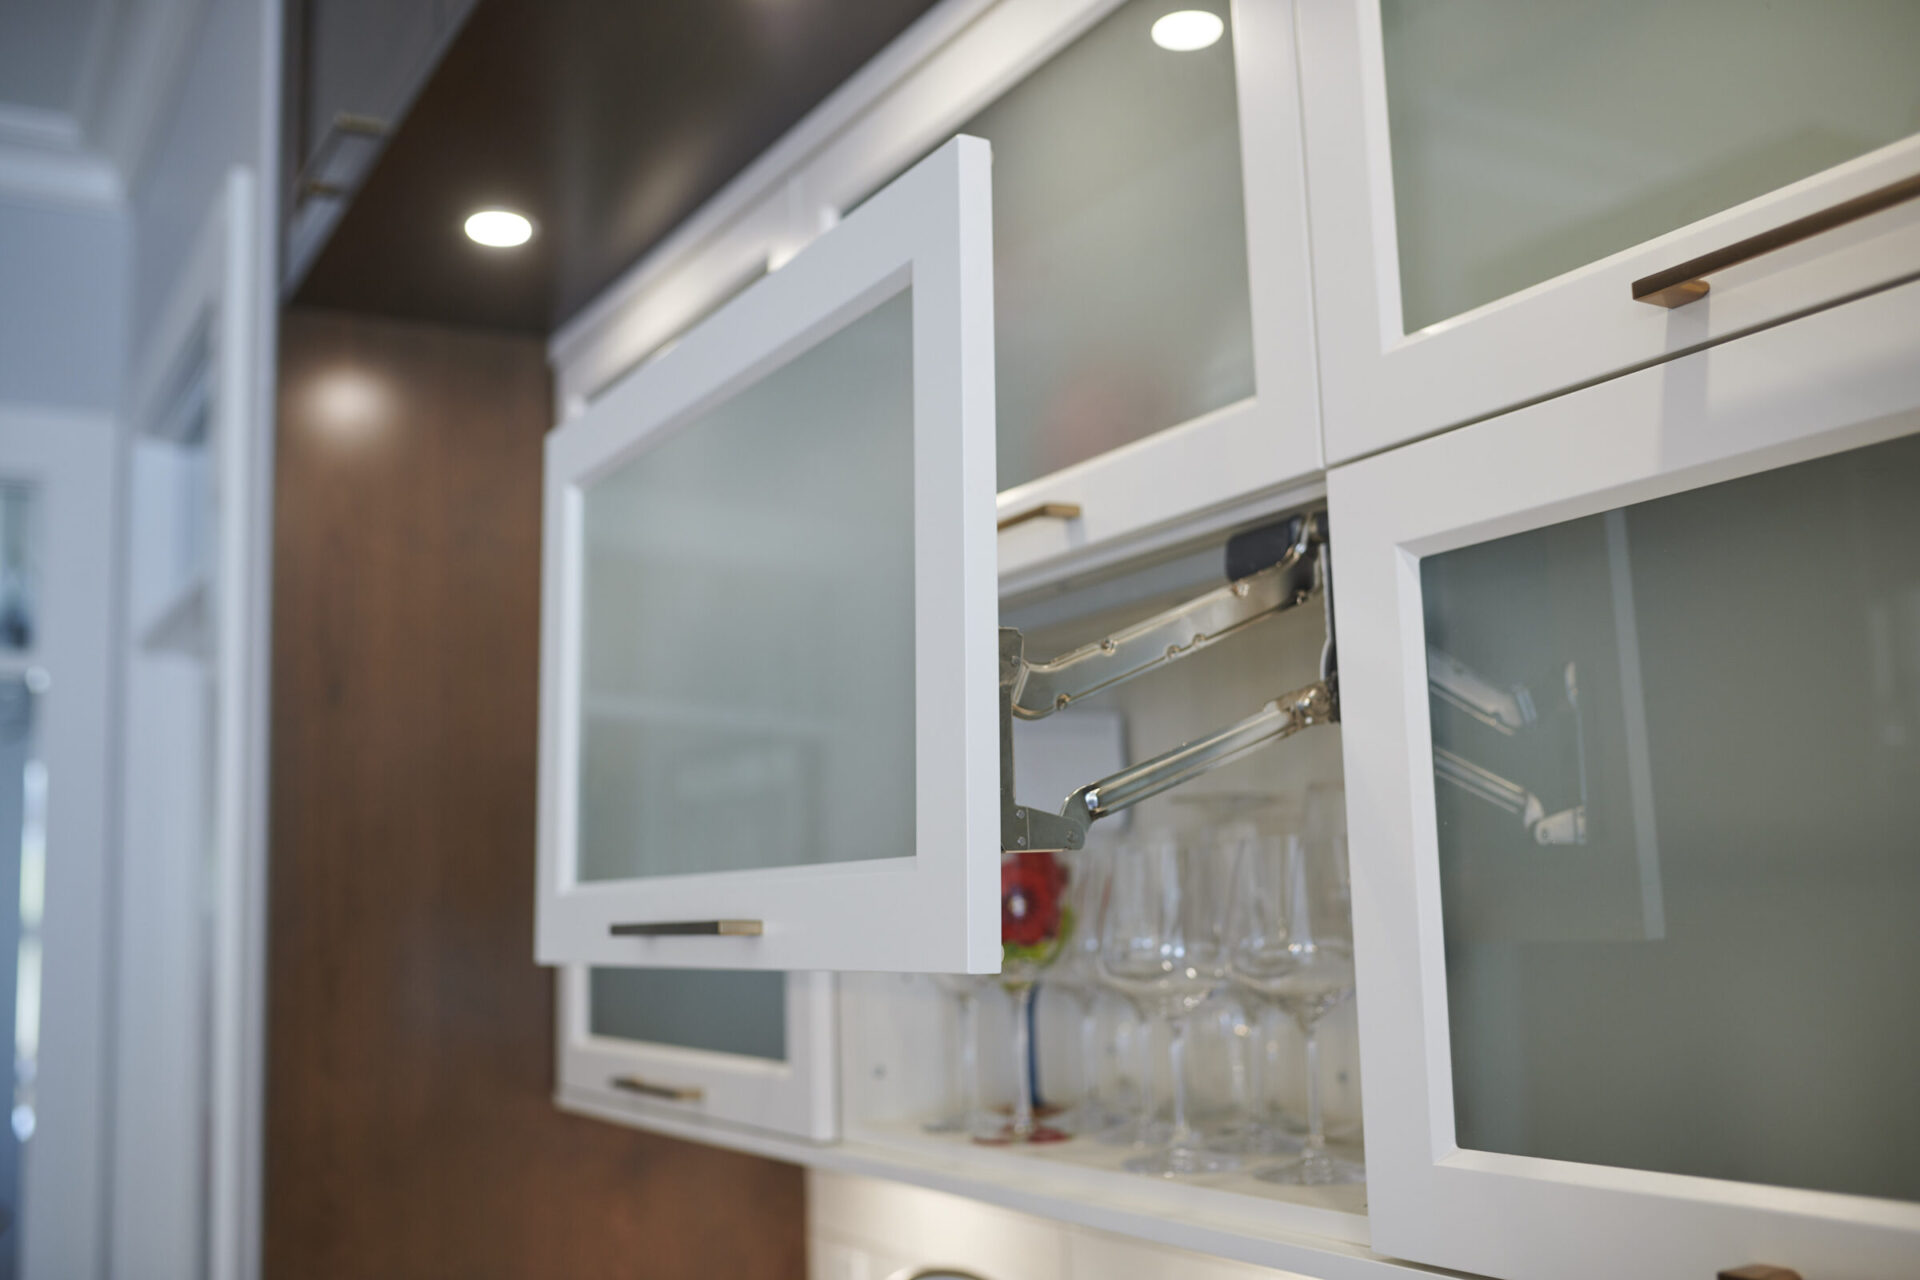 An open white kitchen cabinet with frosted glass doors, revealing stemware glasses inside. The cabinet features modern hardware and a softly lit interior.